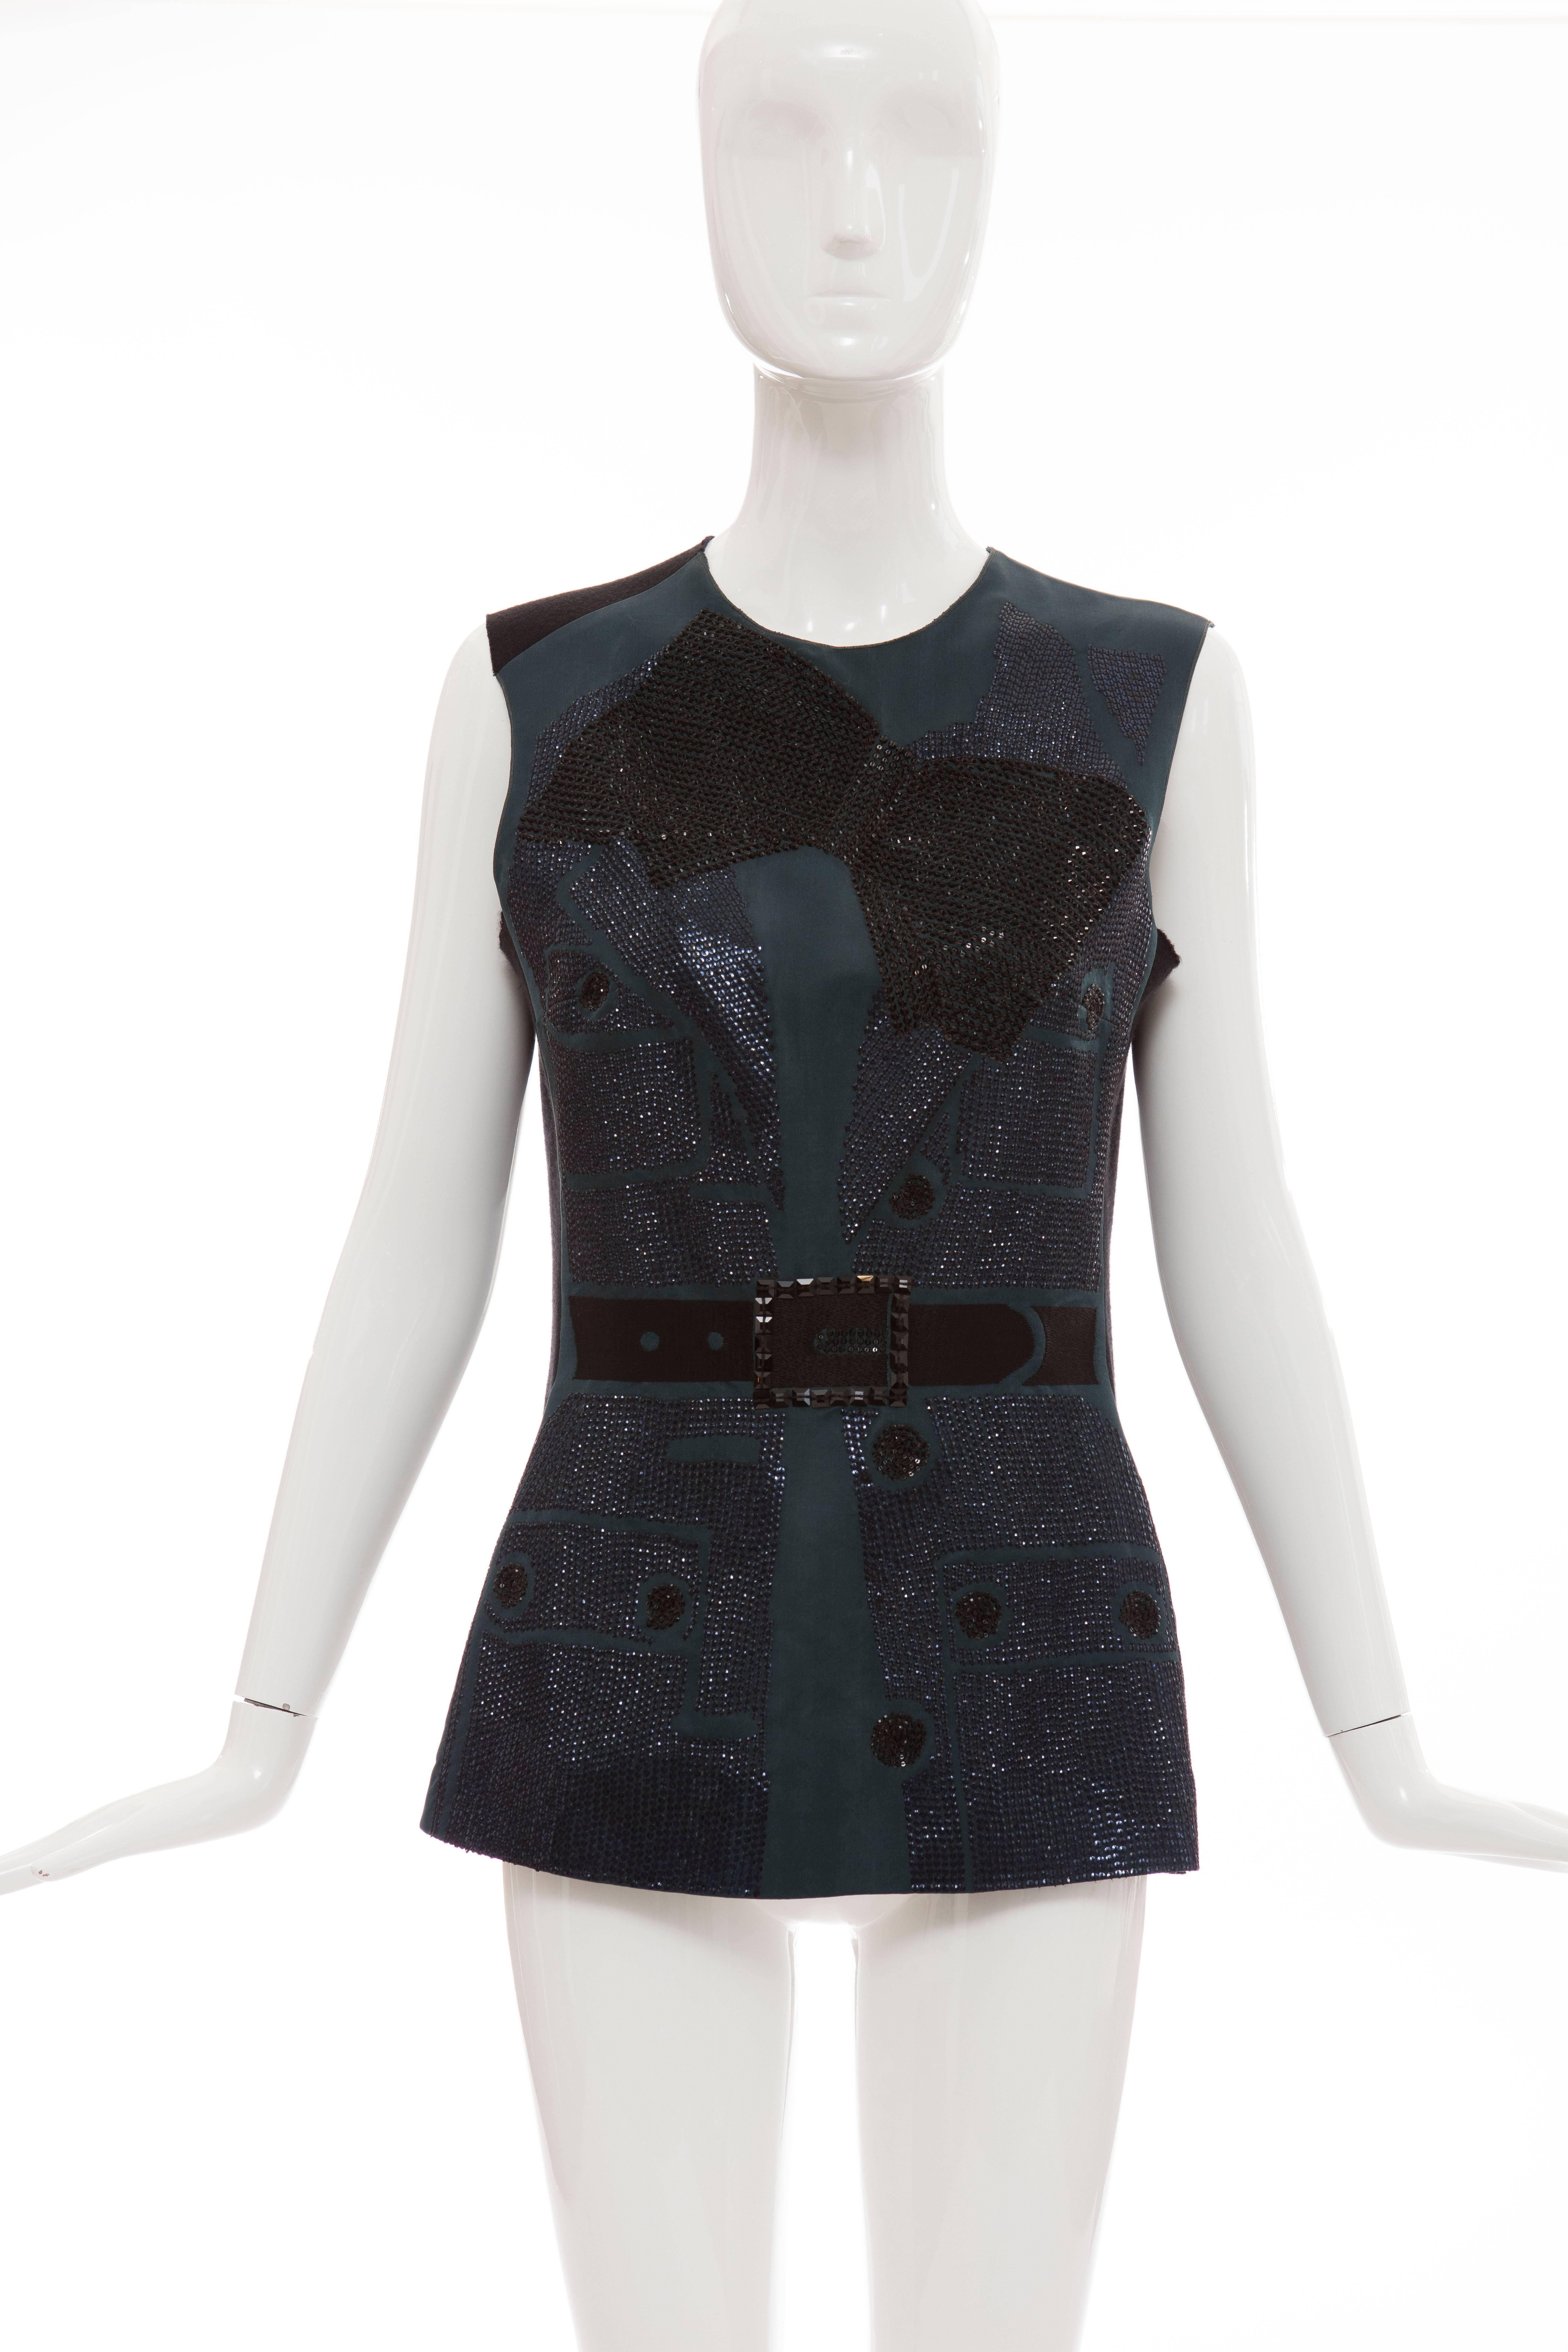 Blue Lanvin By Alber Elbaz Sleeveless Trompe l'oeil  Silk Embellished Top Circa 2006 For Sale